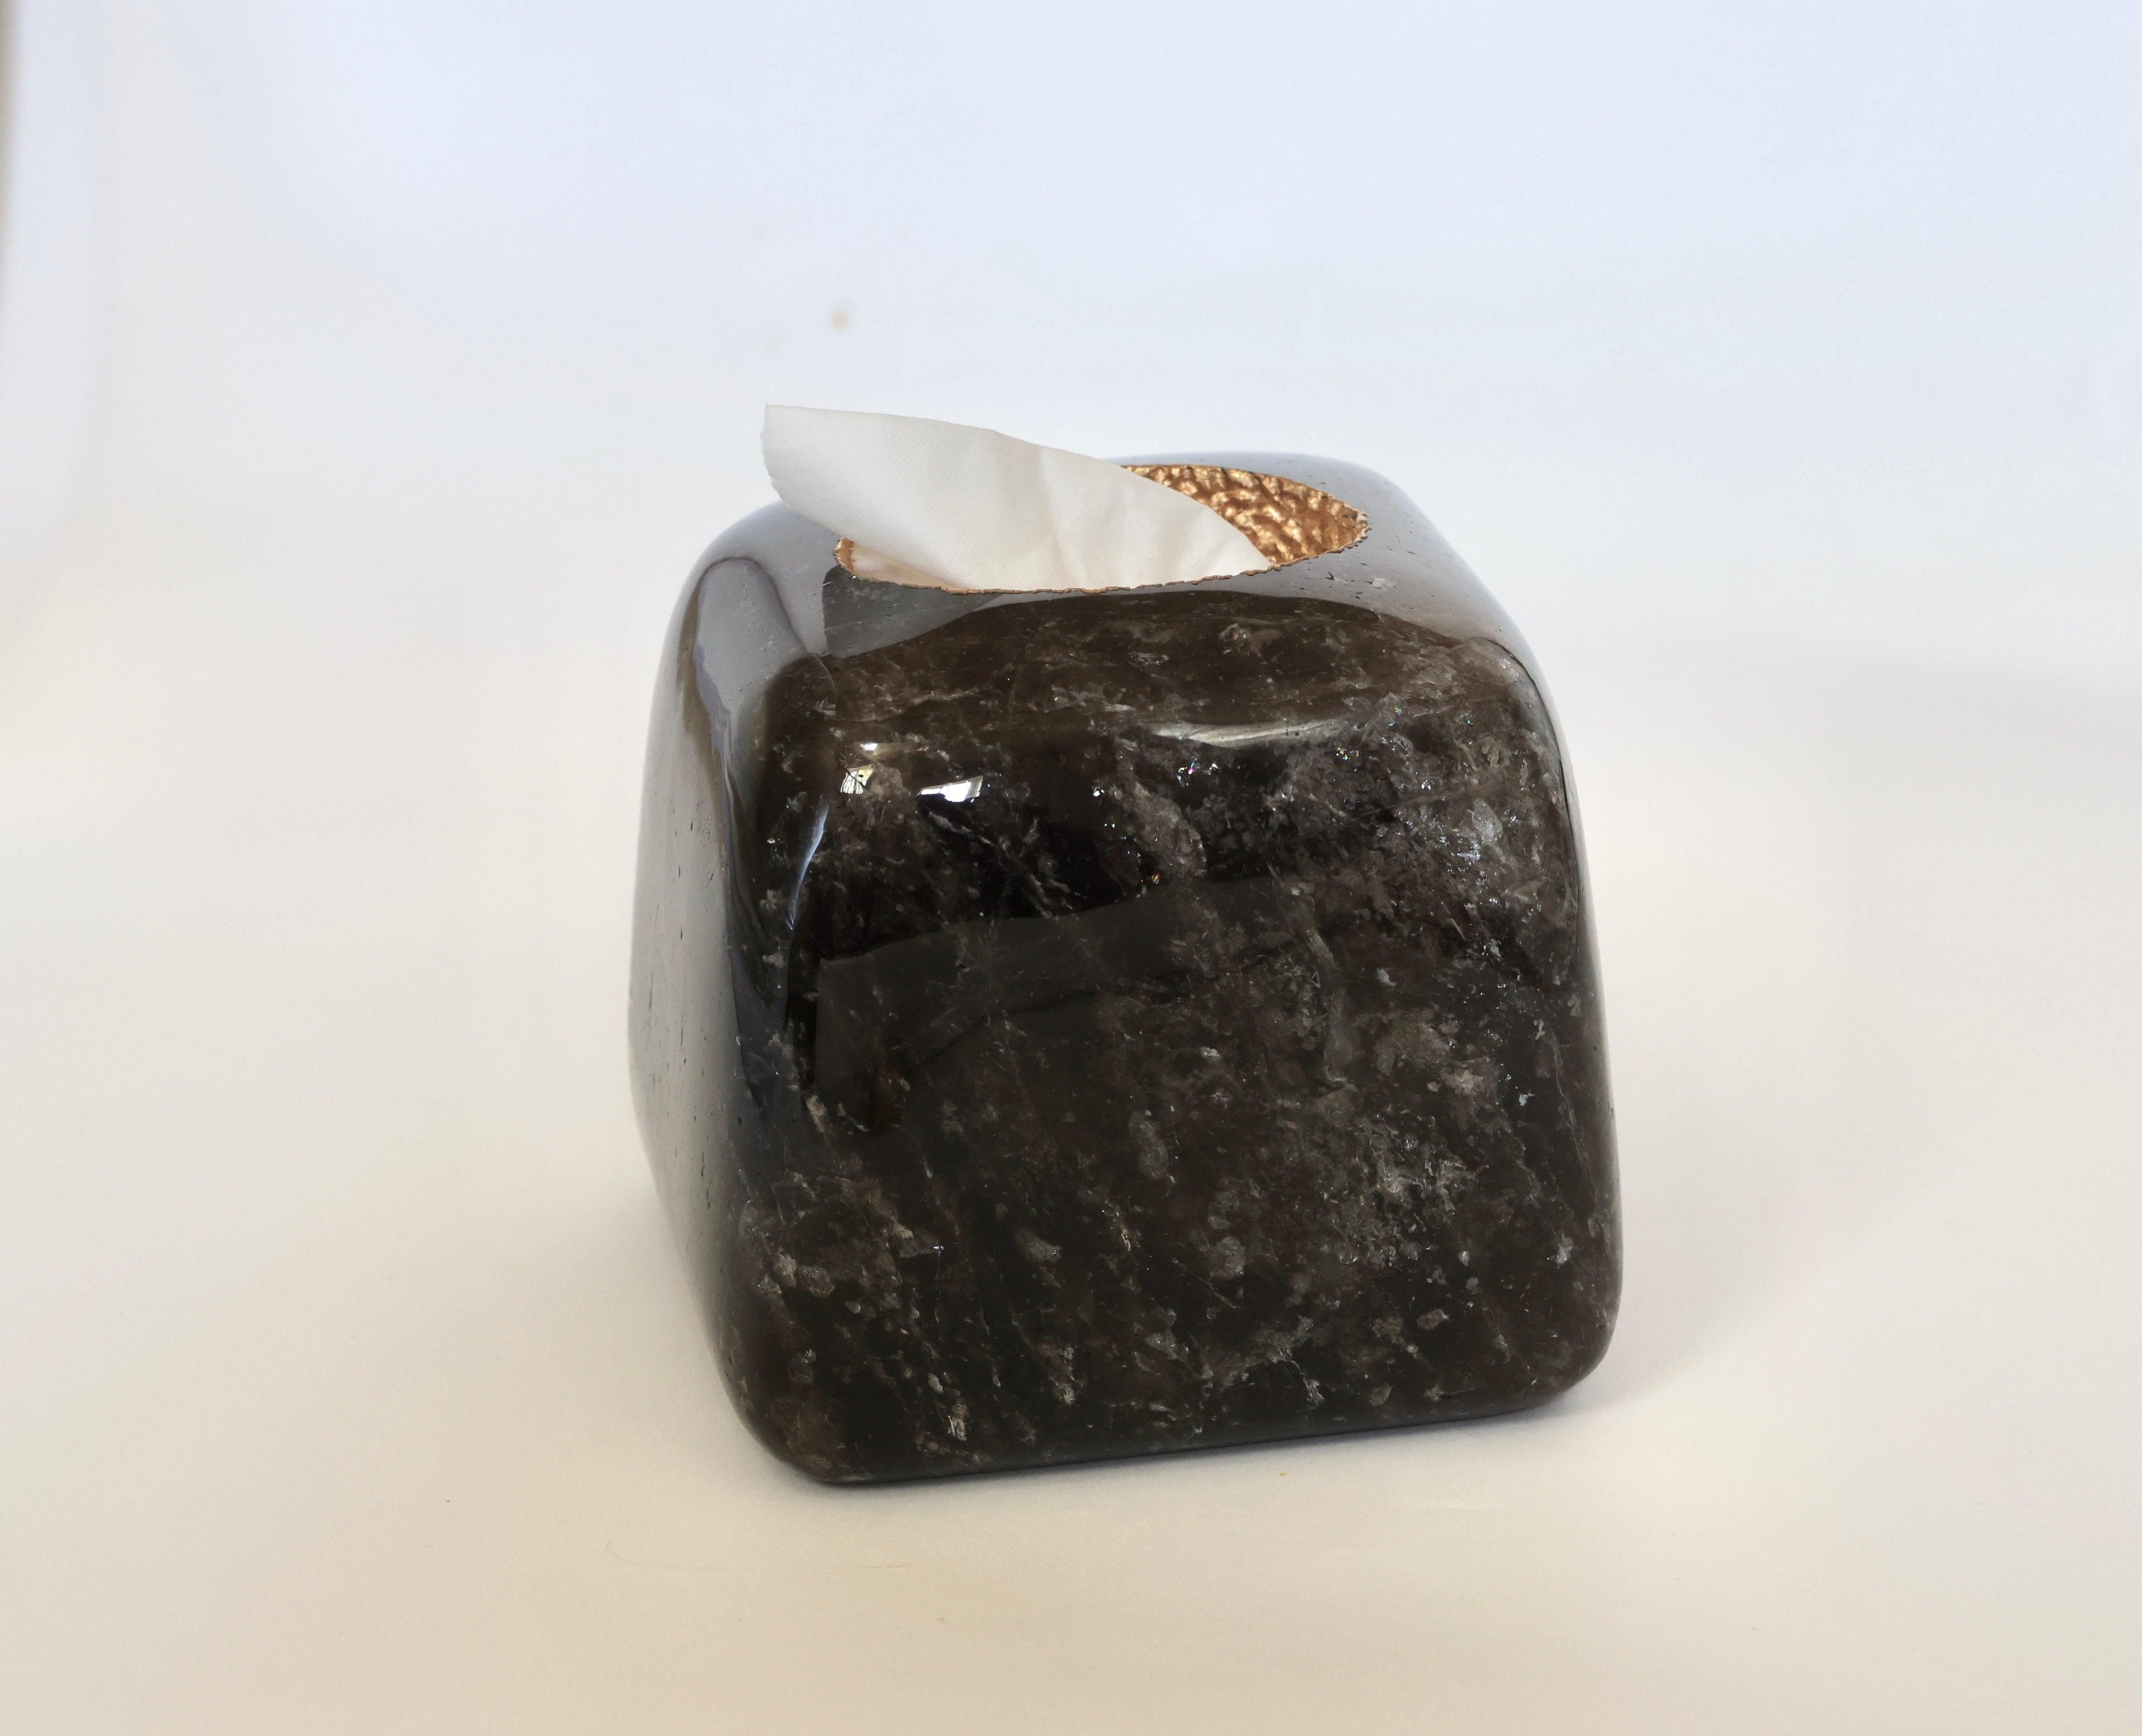 A fine carved natural dark rock crystal tissue box with brass metal decoration on the top rim. Created by Phoenix, NYC.